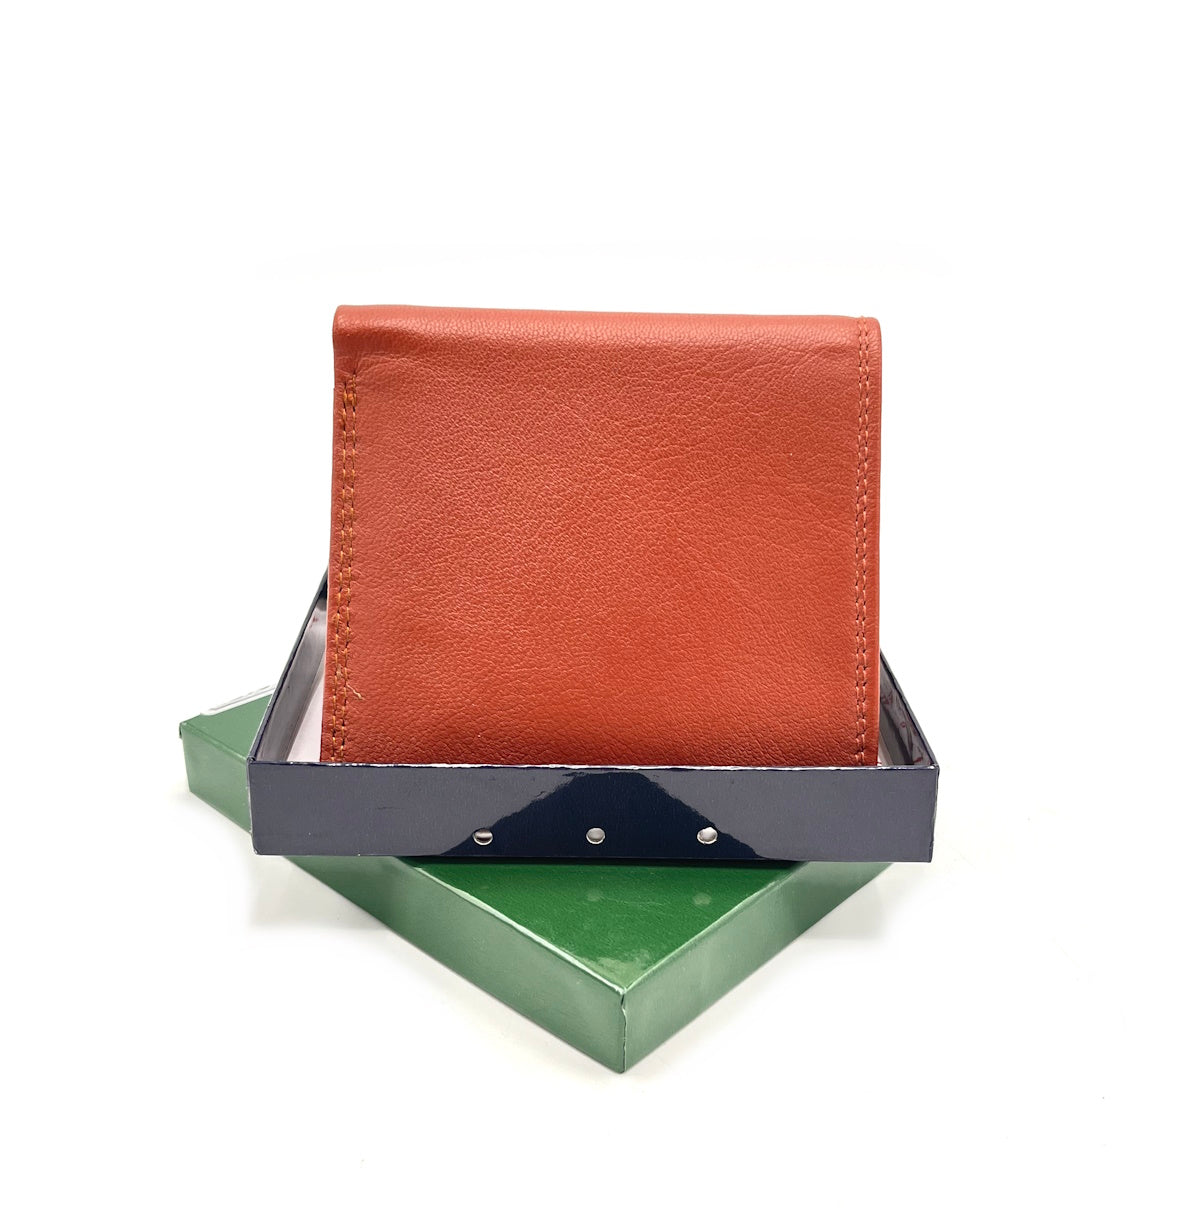 Small genuine leather wallet, for women, art. 2175.422